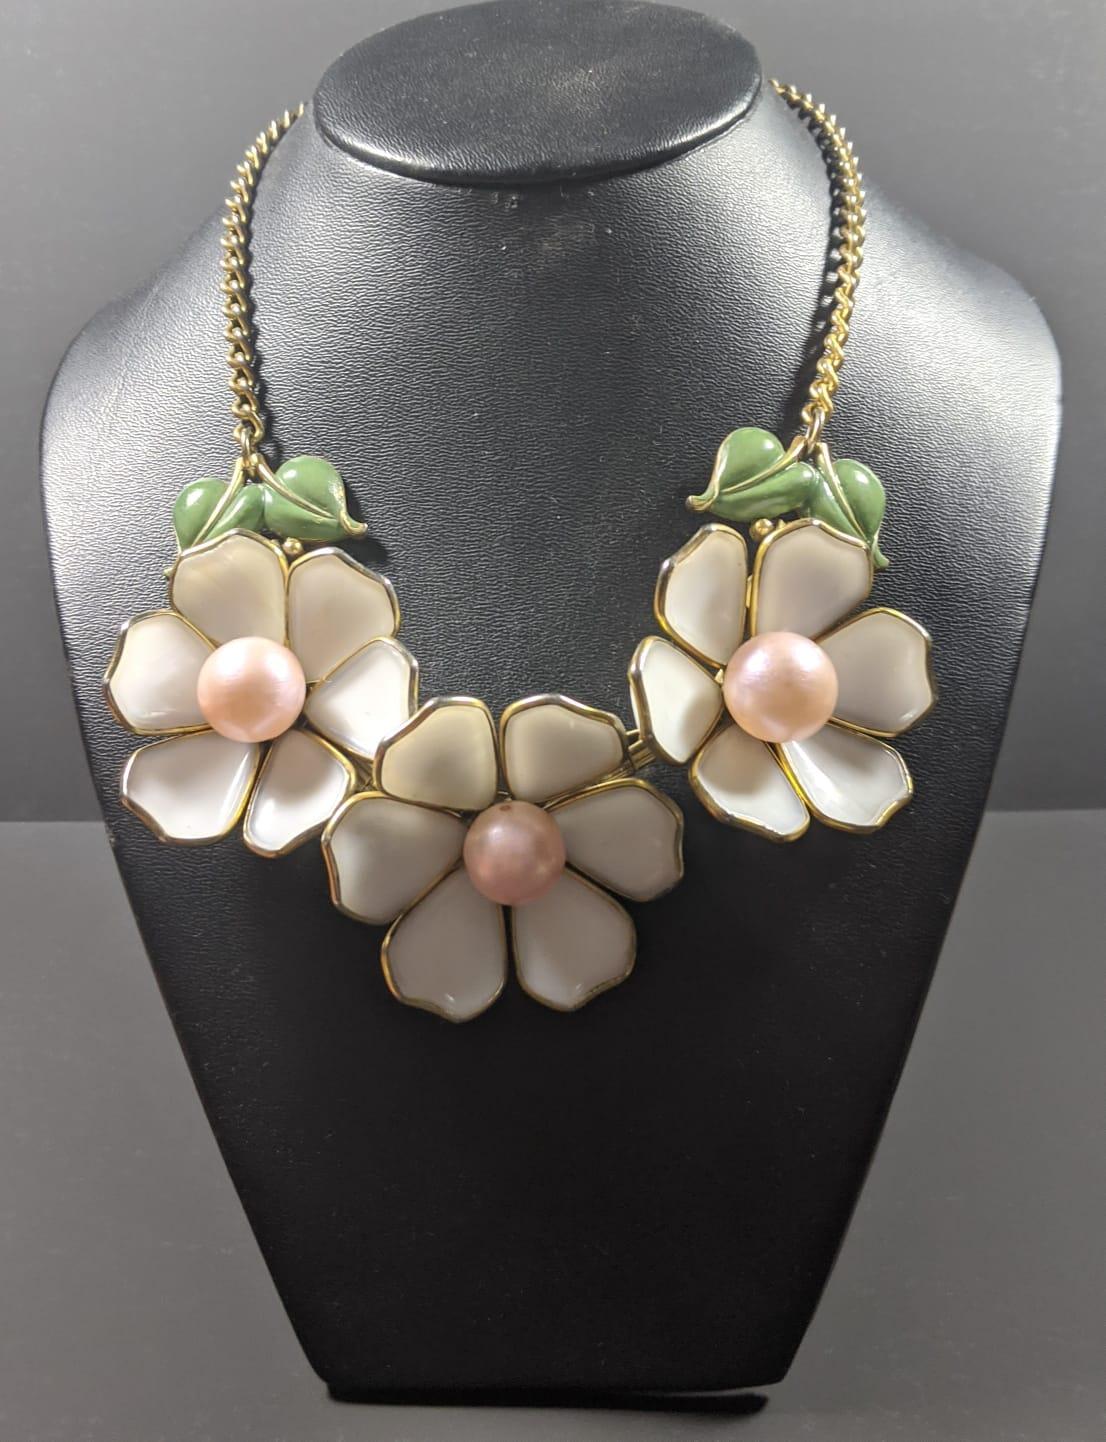 Beautiful old NECKLACE,
petals in white cast glass, green leaves in enamelled metal, Gripoix glass,
TRIFARI Alfred Philippe Gripoix,
VINTAGE 40s,
diameter of a flower 4.5 cm,
total length (with chain) 39cm,
very good quality,
collectible,

Good